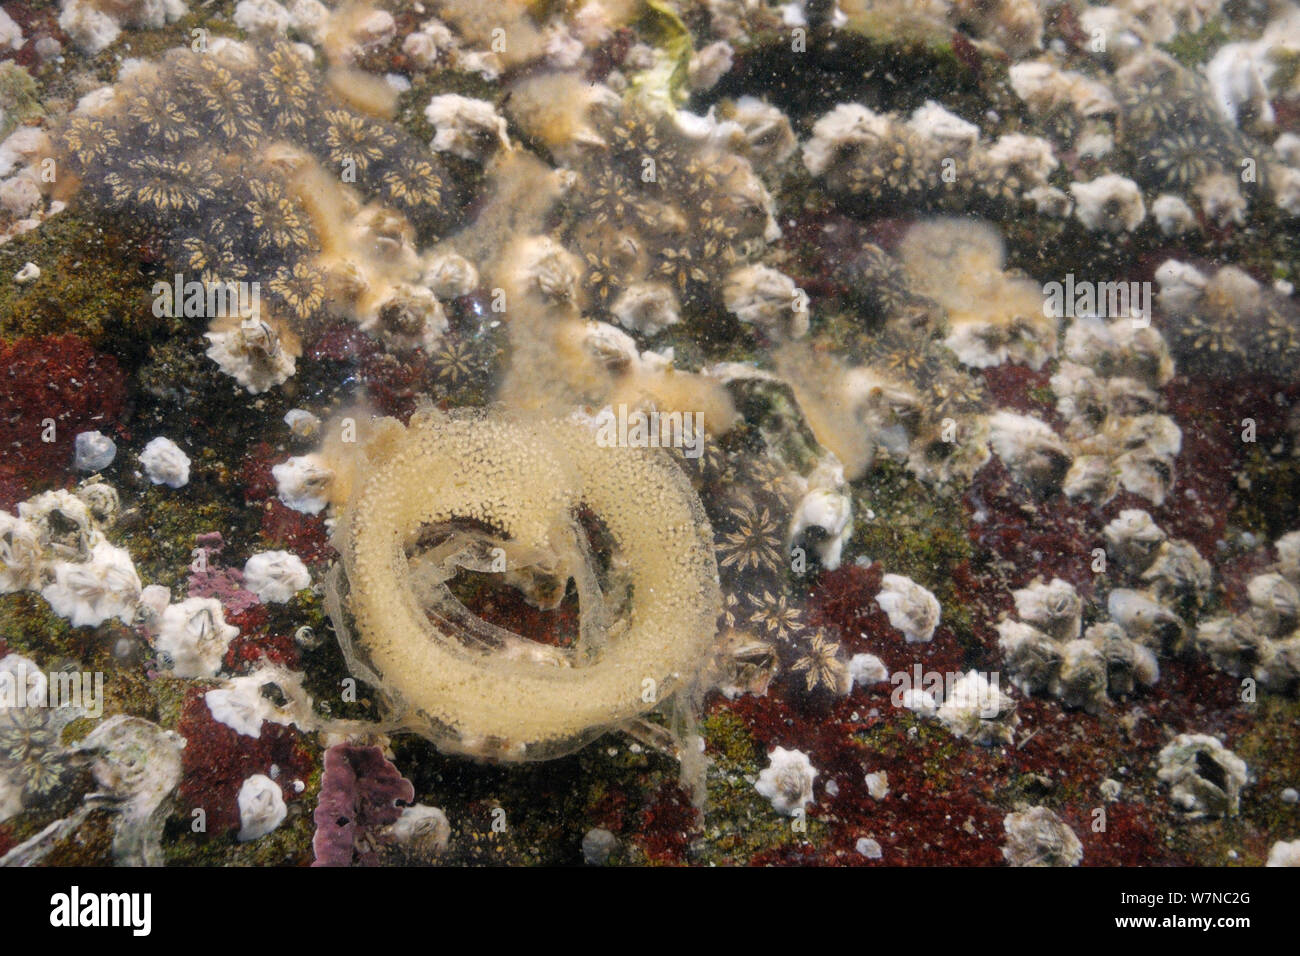 Spiral egg ribbon of a sea slug (probably Haminoea navicula) attached to a boulder in a rockpool alongside Star ascidians (Botryllus schlosseri), Bryozoans, Barnacles and Red algae low on the shore, Helford River, Cornwall, UK, August. Stock Photo